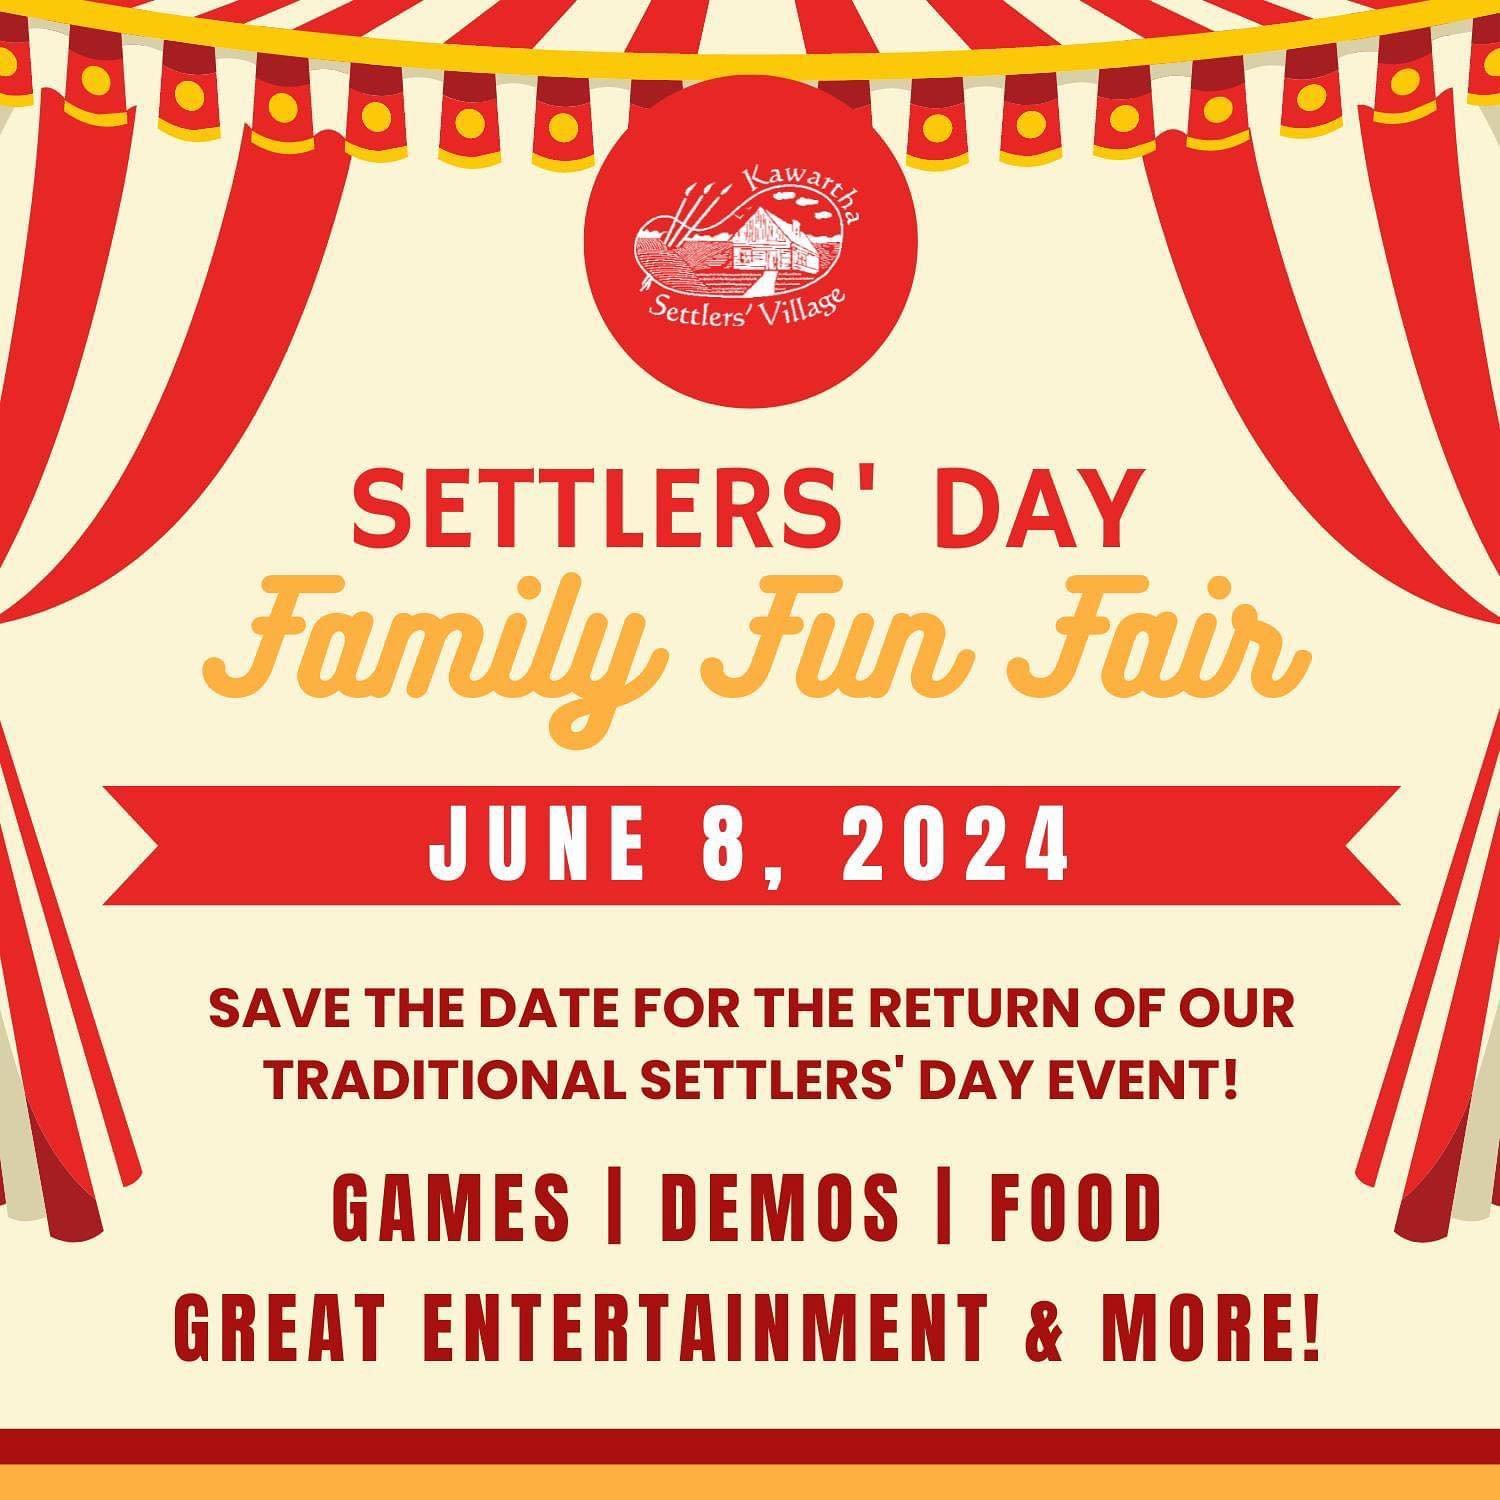 Mark you calendars! Settlers&rsquo; Day is back June 8th from 10am-4pm at Kawartha Settlers&rsquo; Village! ✨ @kawarthasettlersvillage 

Admission is by donation.

⭐️ Games &amp; Prizes
⭐️ Demos &amp; Vendors
⭐️ Music &amp; Entertainment
⭐️ Food &amp